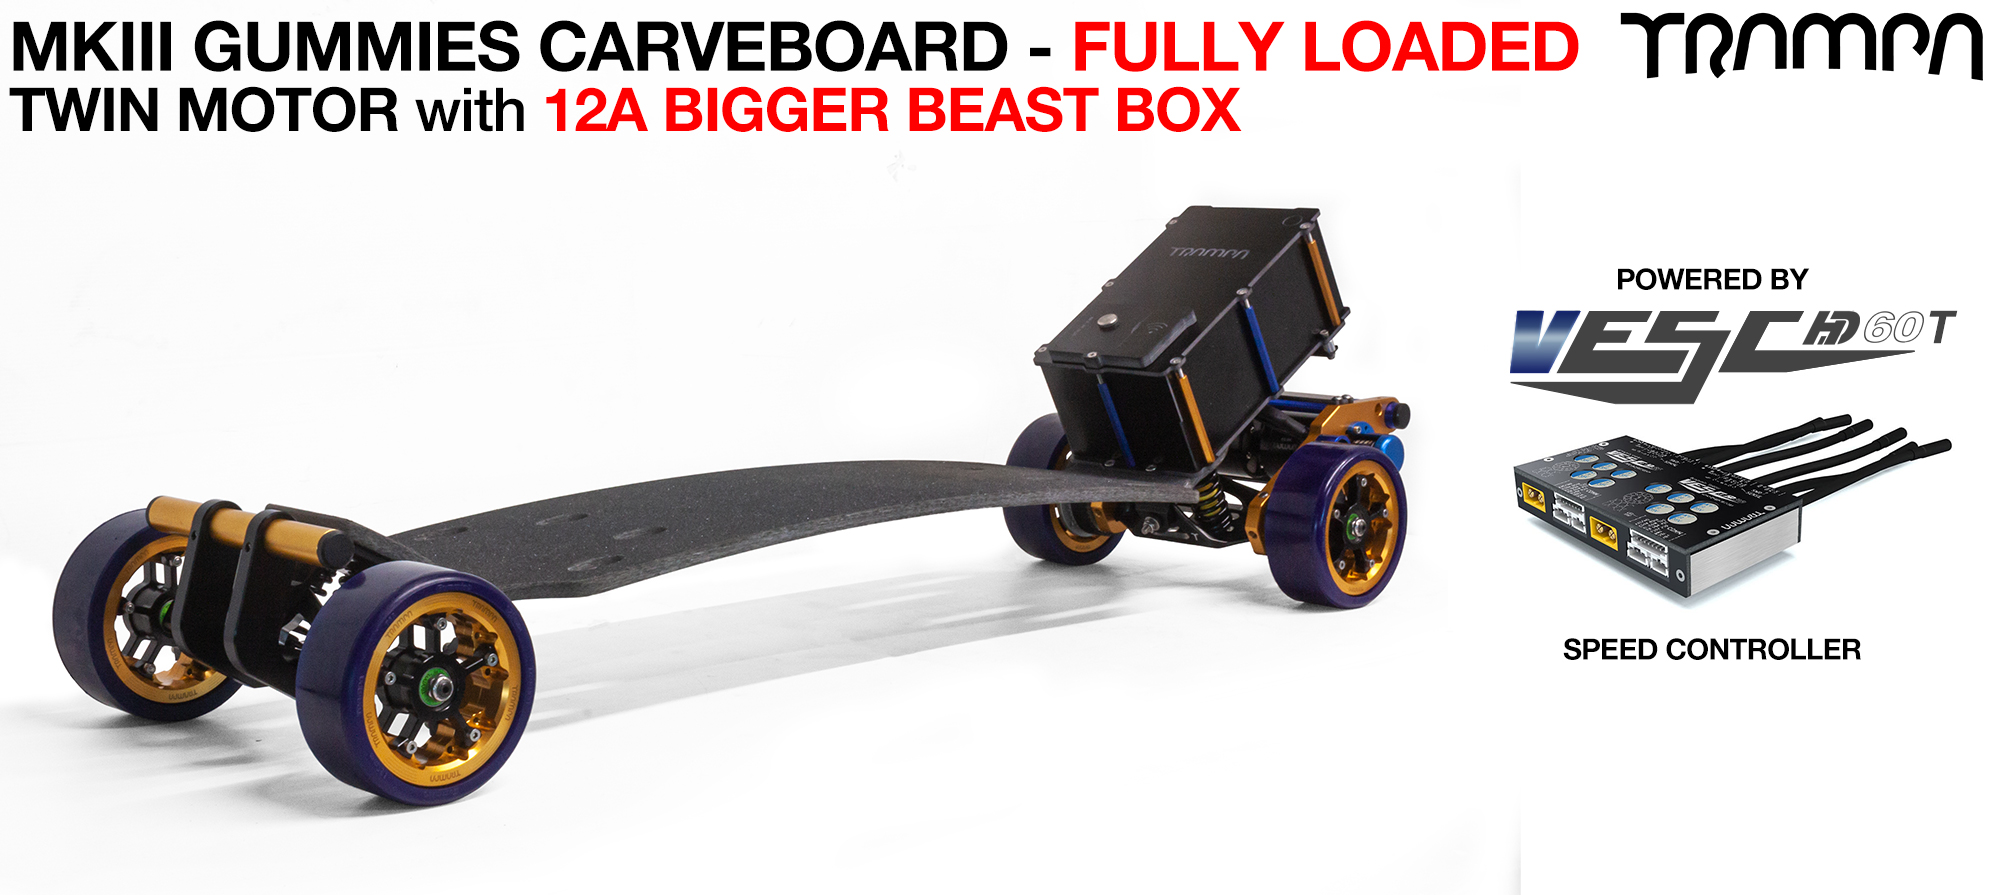 MkIII GUMMIES ELECTRIC Carveboard TWIN motor VESC HD-60T - 12A FULLY LOADED £ (£1,500) (out of stock)